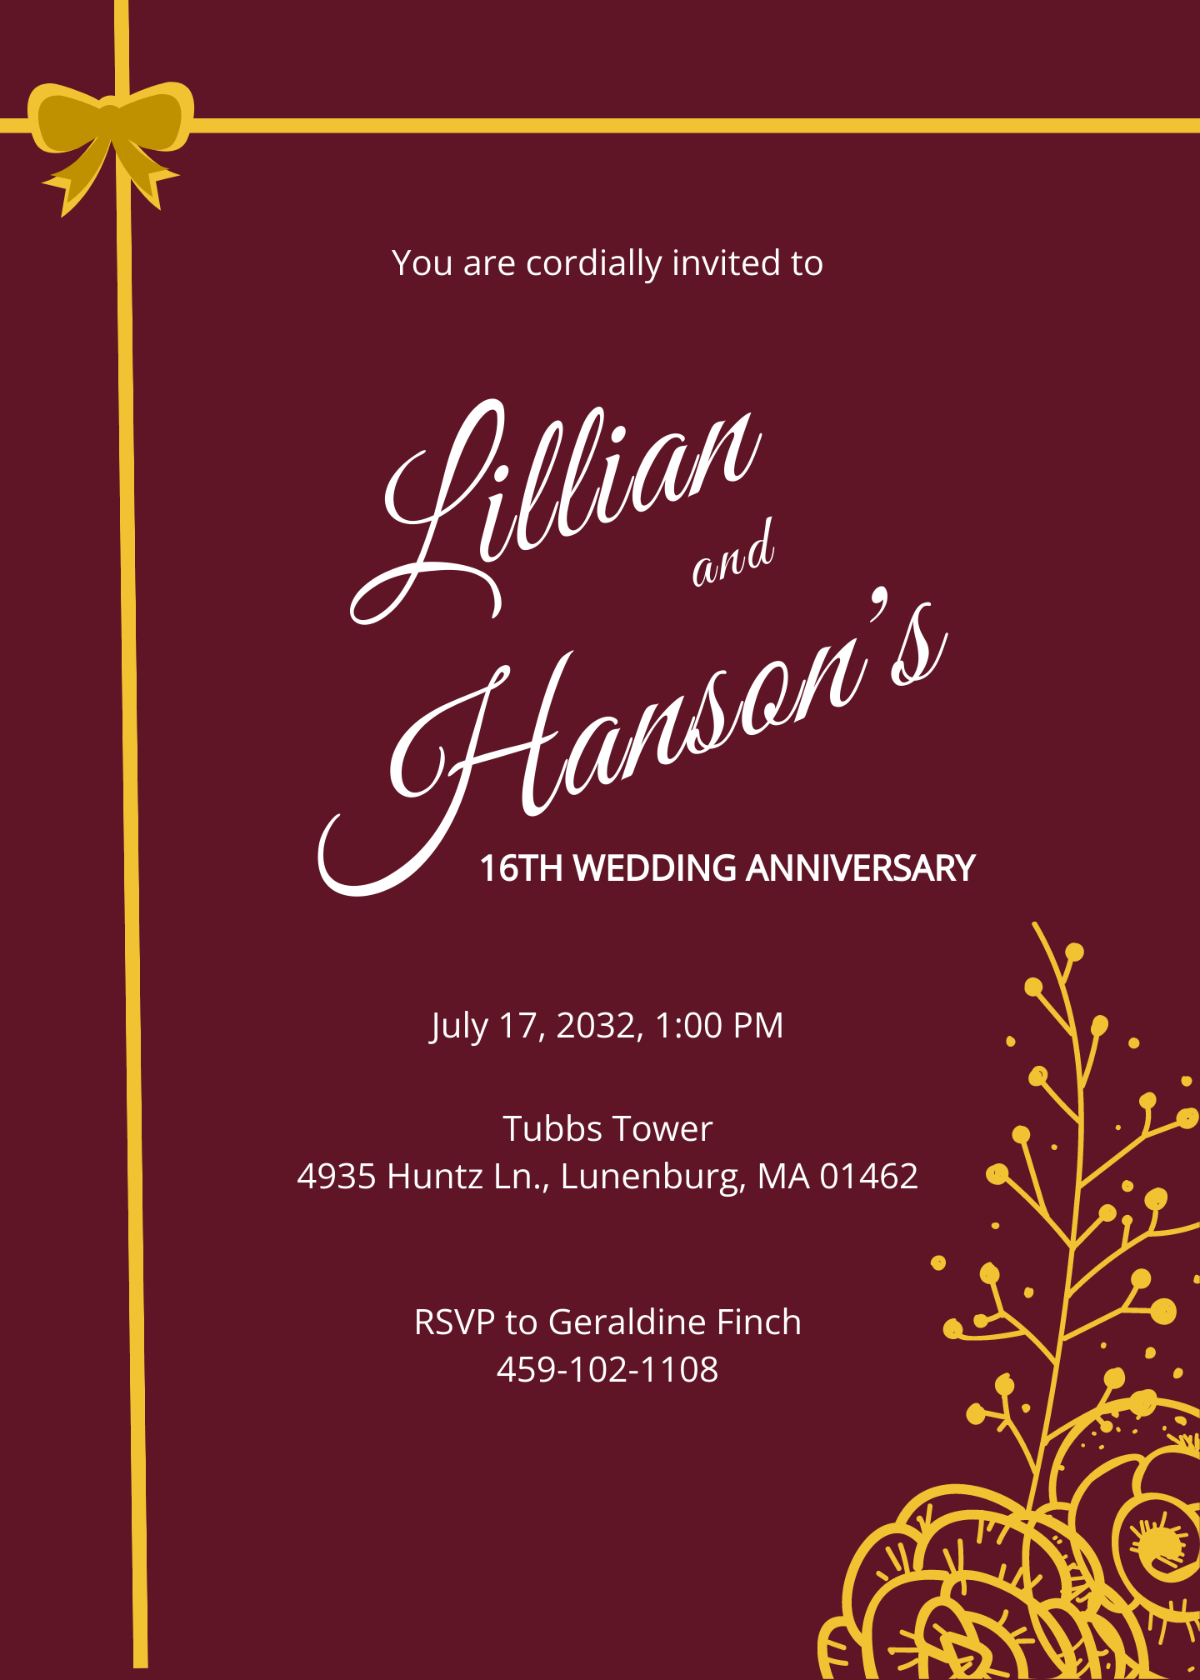 Anniversary Invitation With Maroon and Gold Ribbons Template